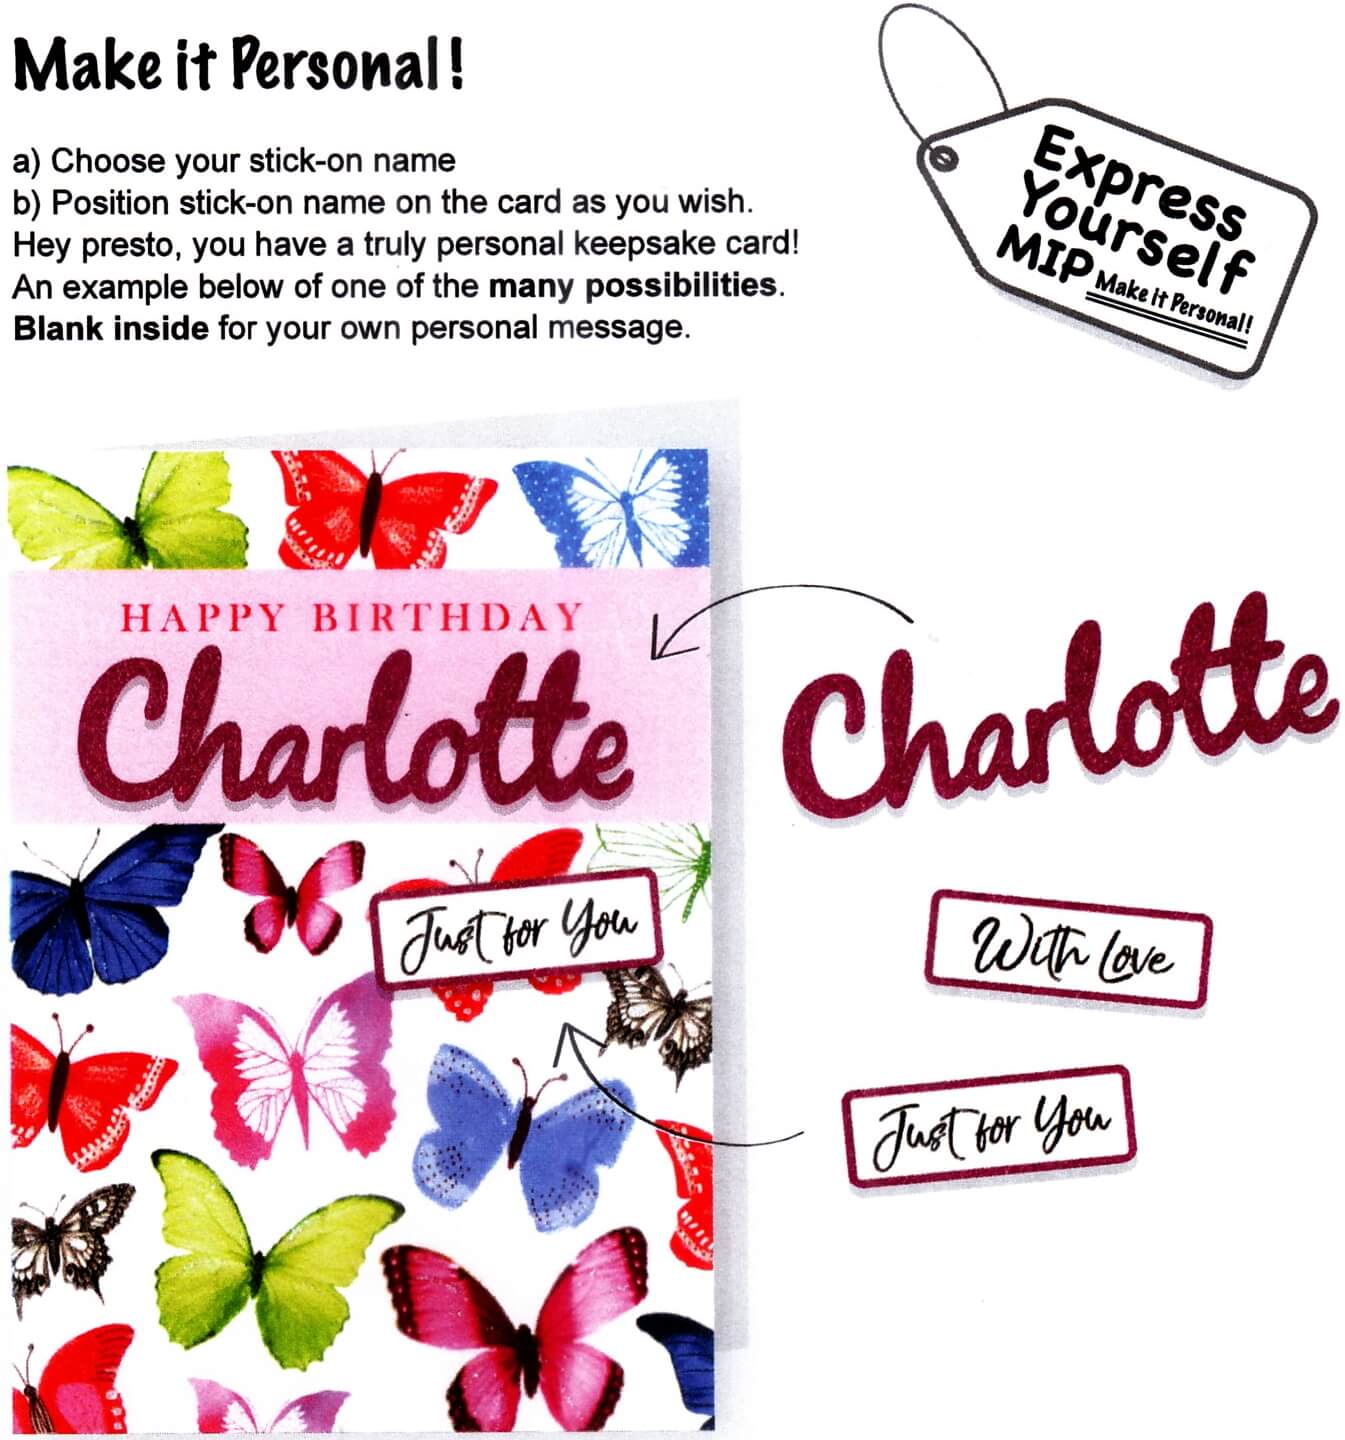 Greeting card for a person named Charlotte